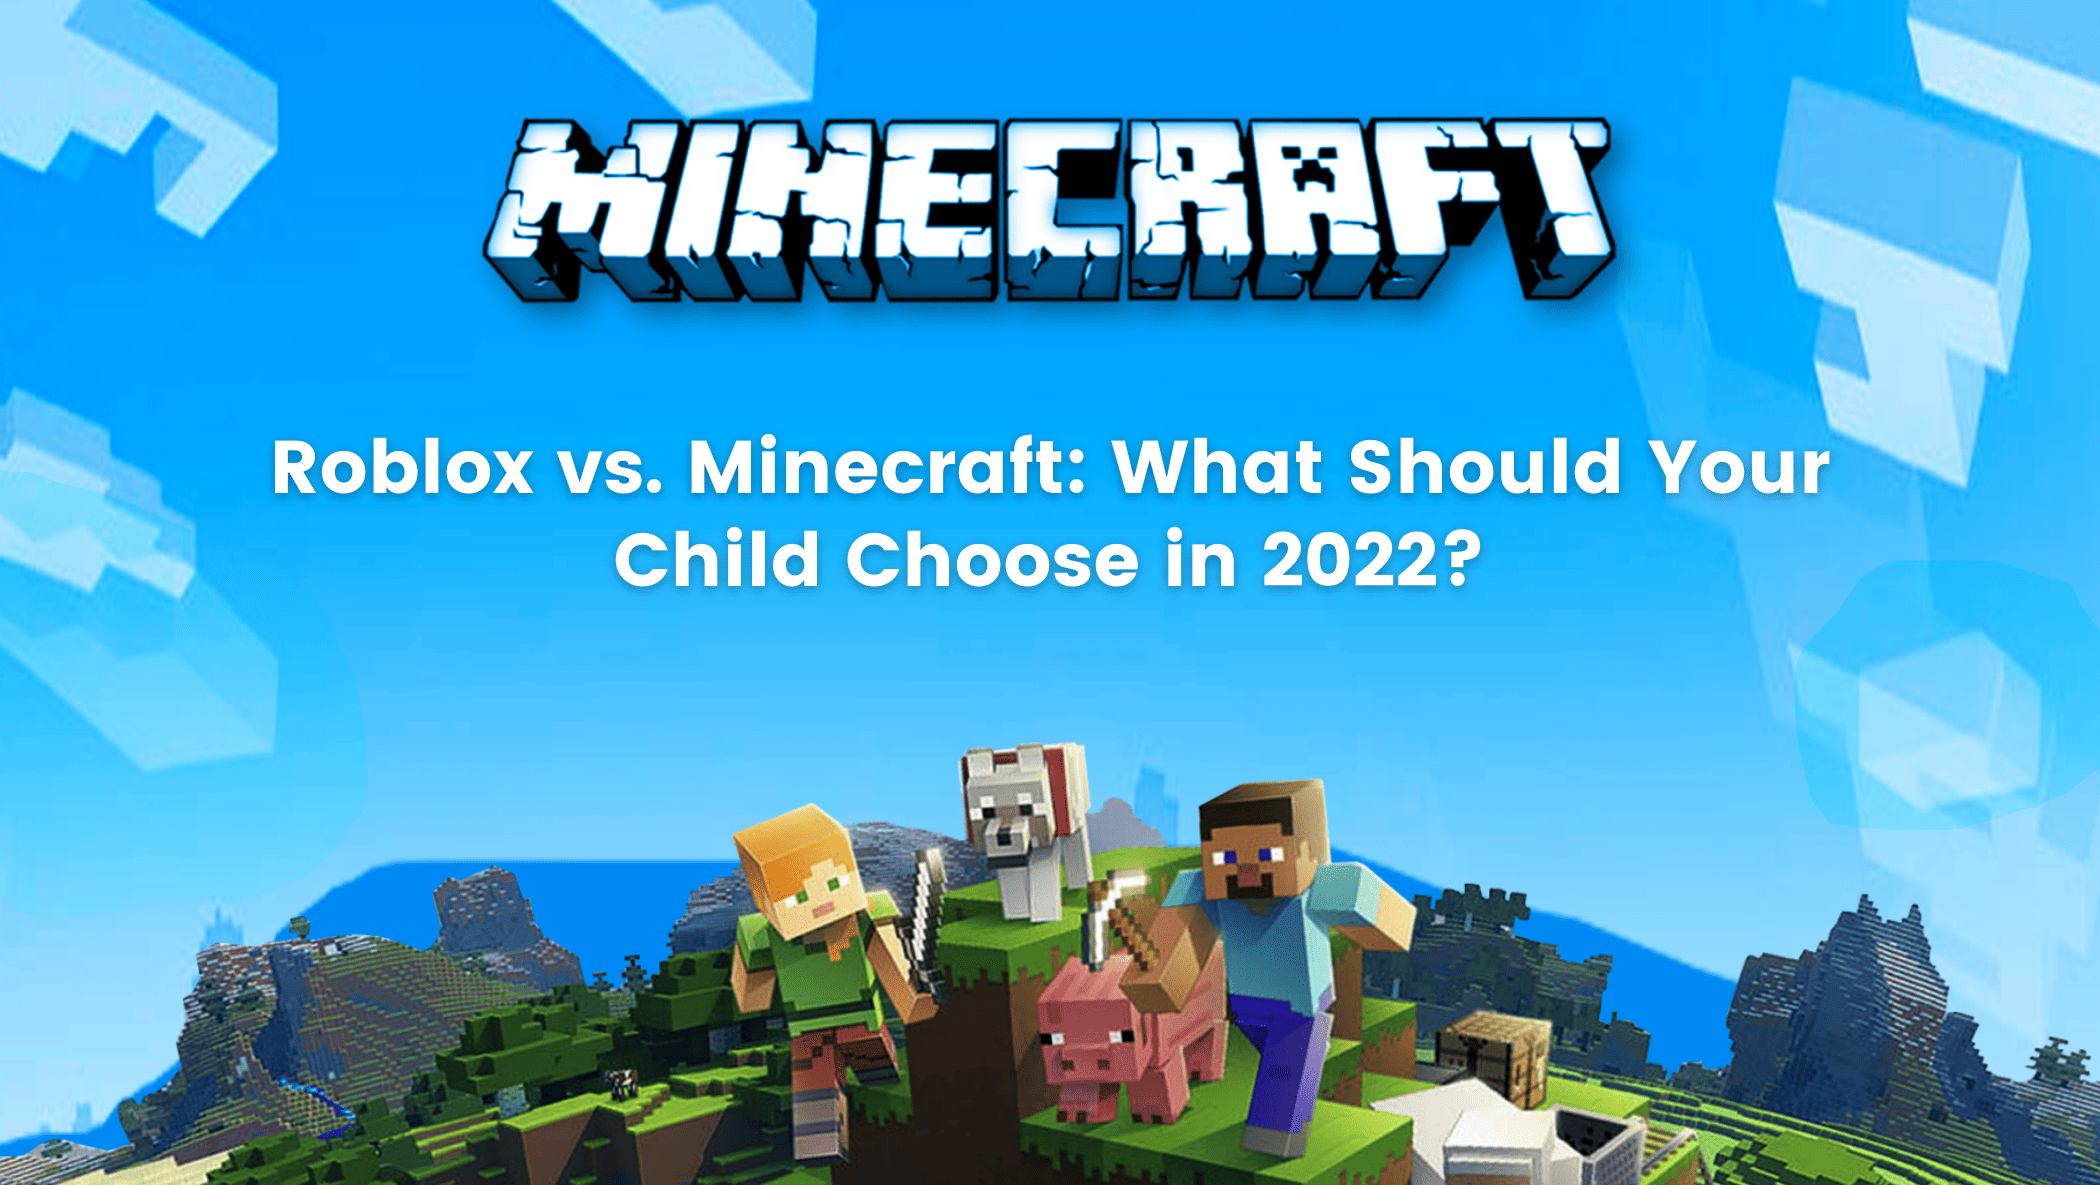 Roblox vs. Minecraft What Should Your Child Choose in 2022